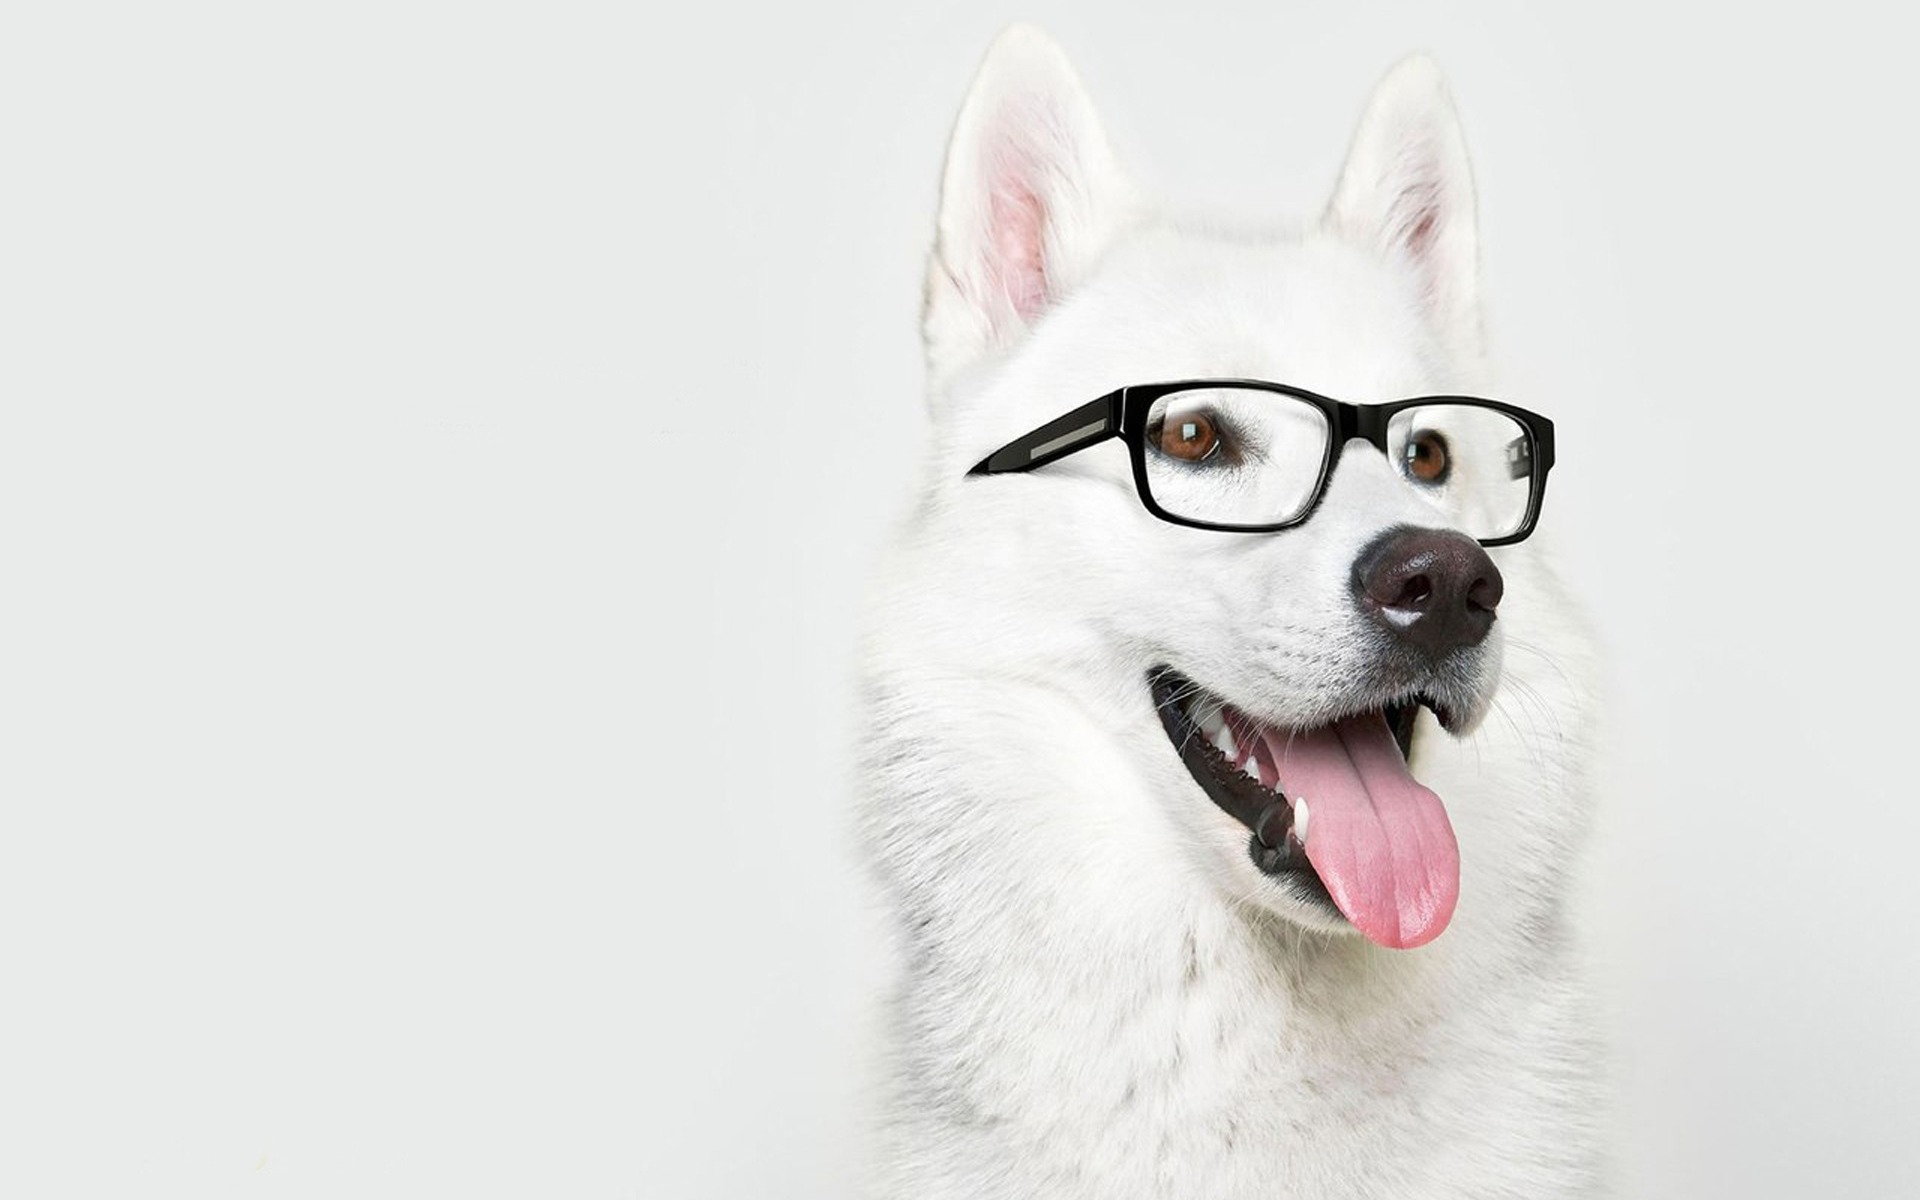 Awesome Dog with Glasses wallpaper | 1920x1200 | #11451